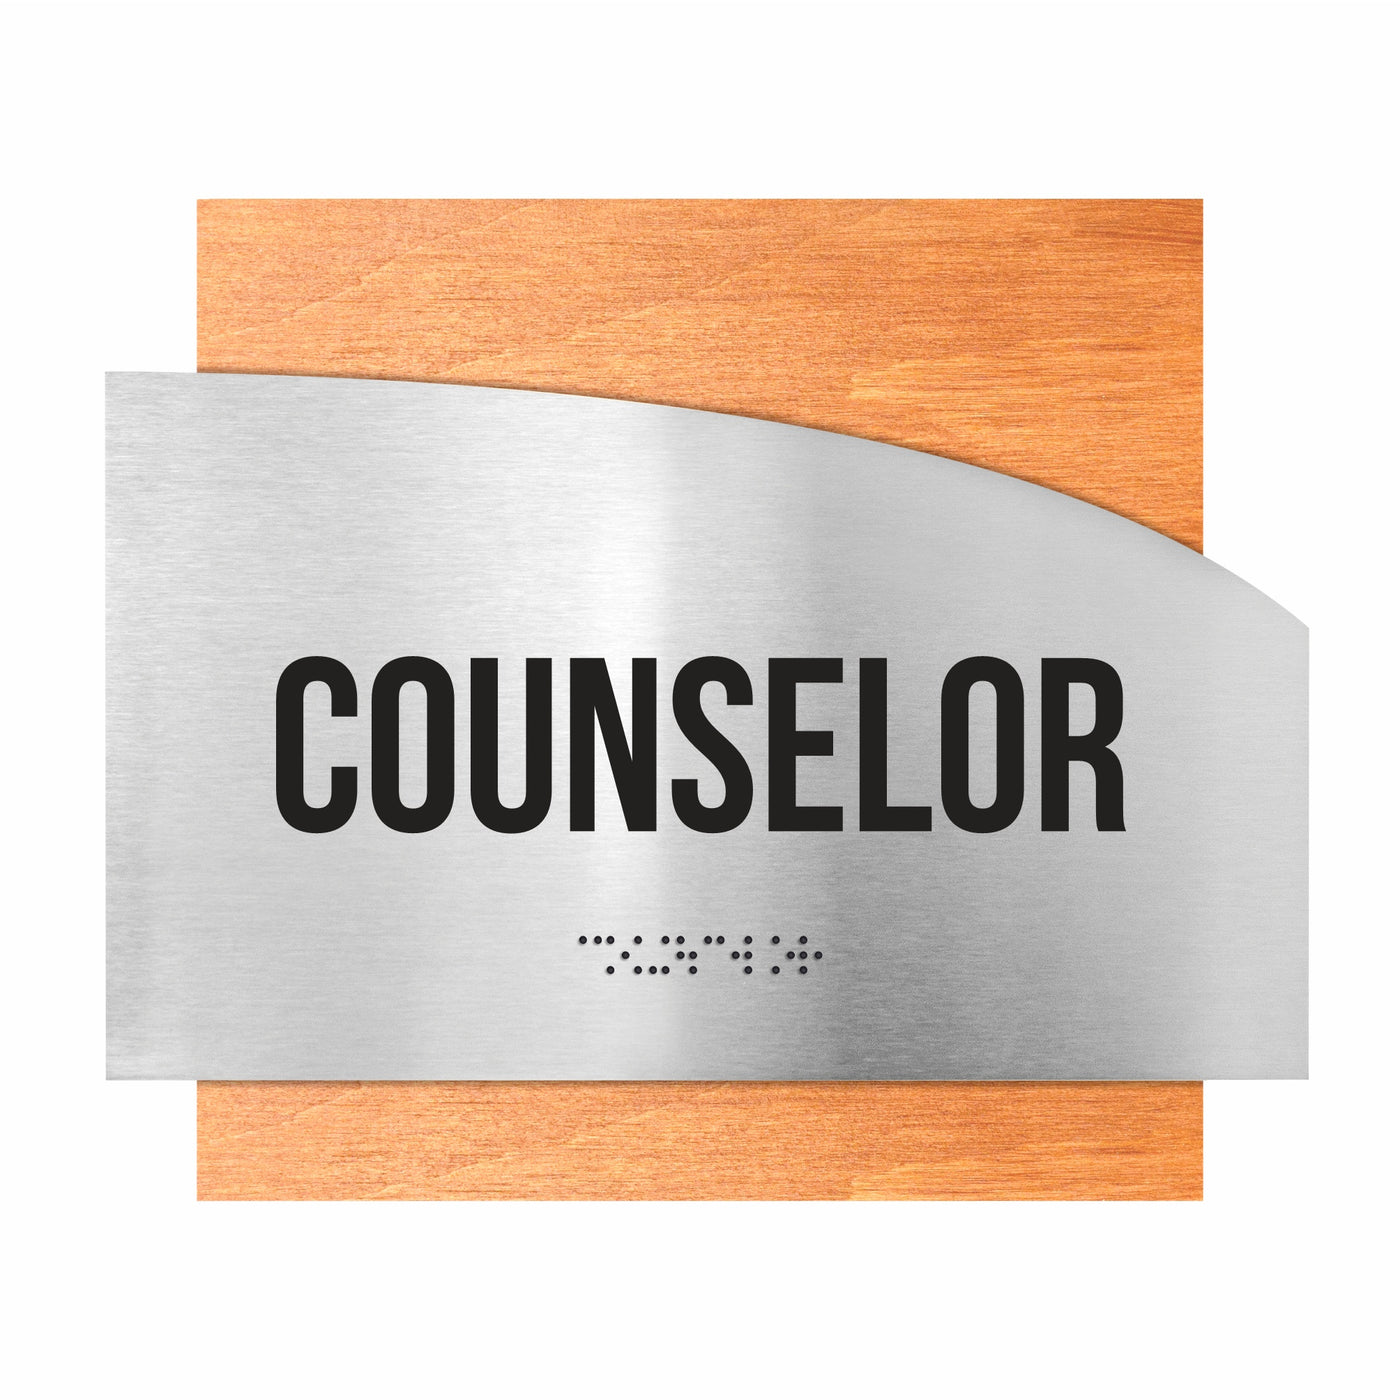 Door Signs - Counselor Sign - Stainless Steel & Wood Plate - "Wave" Design